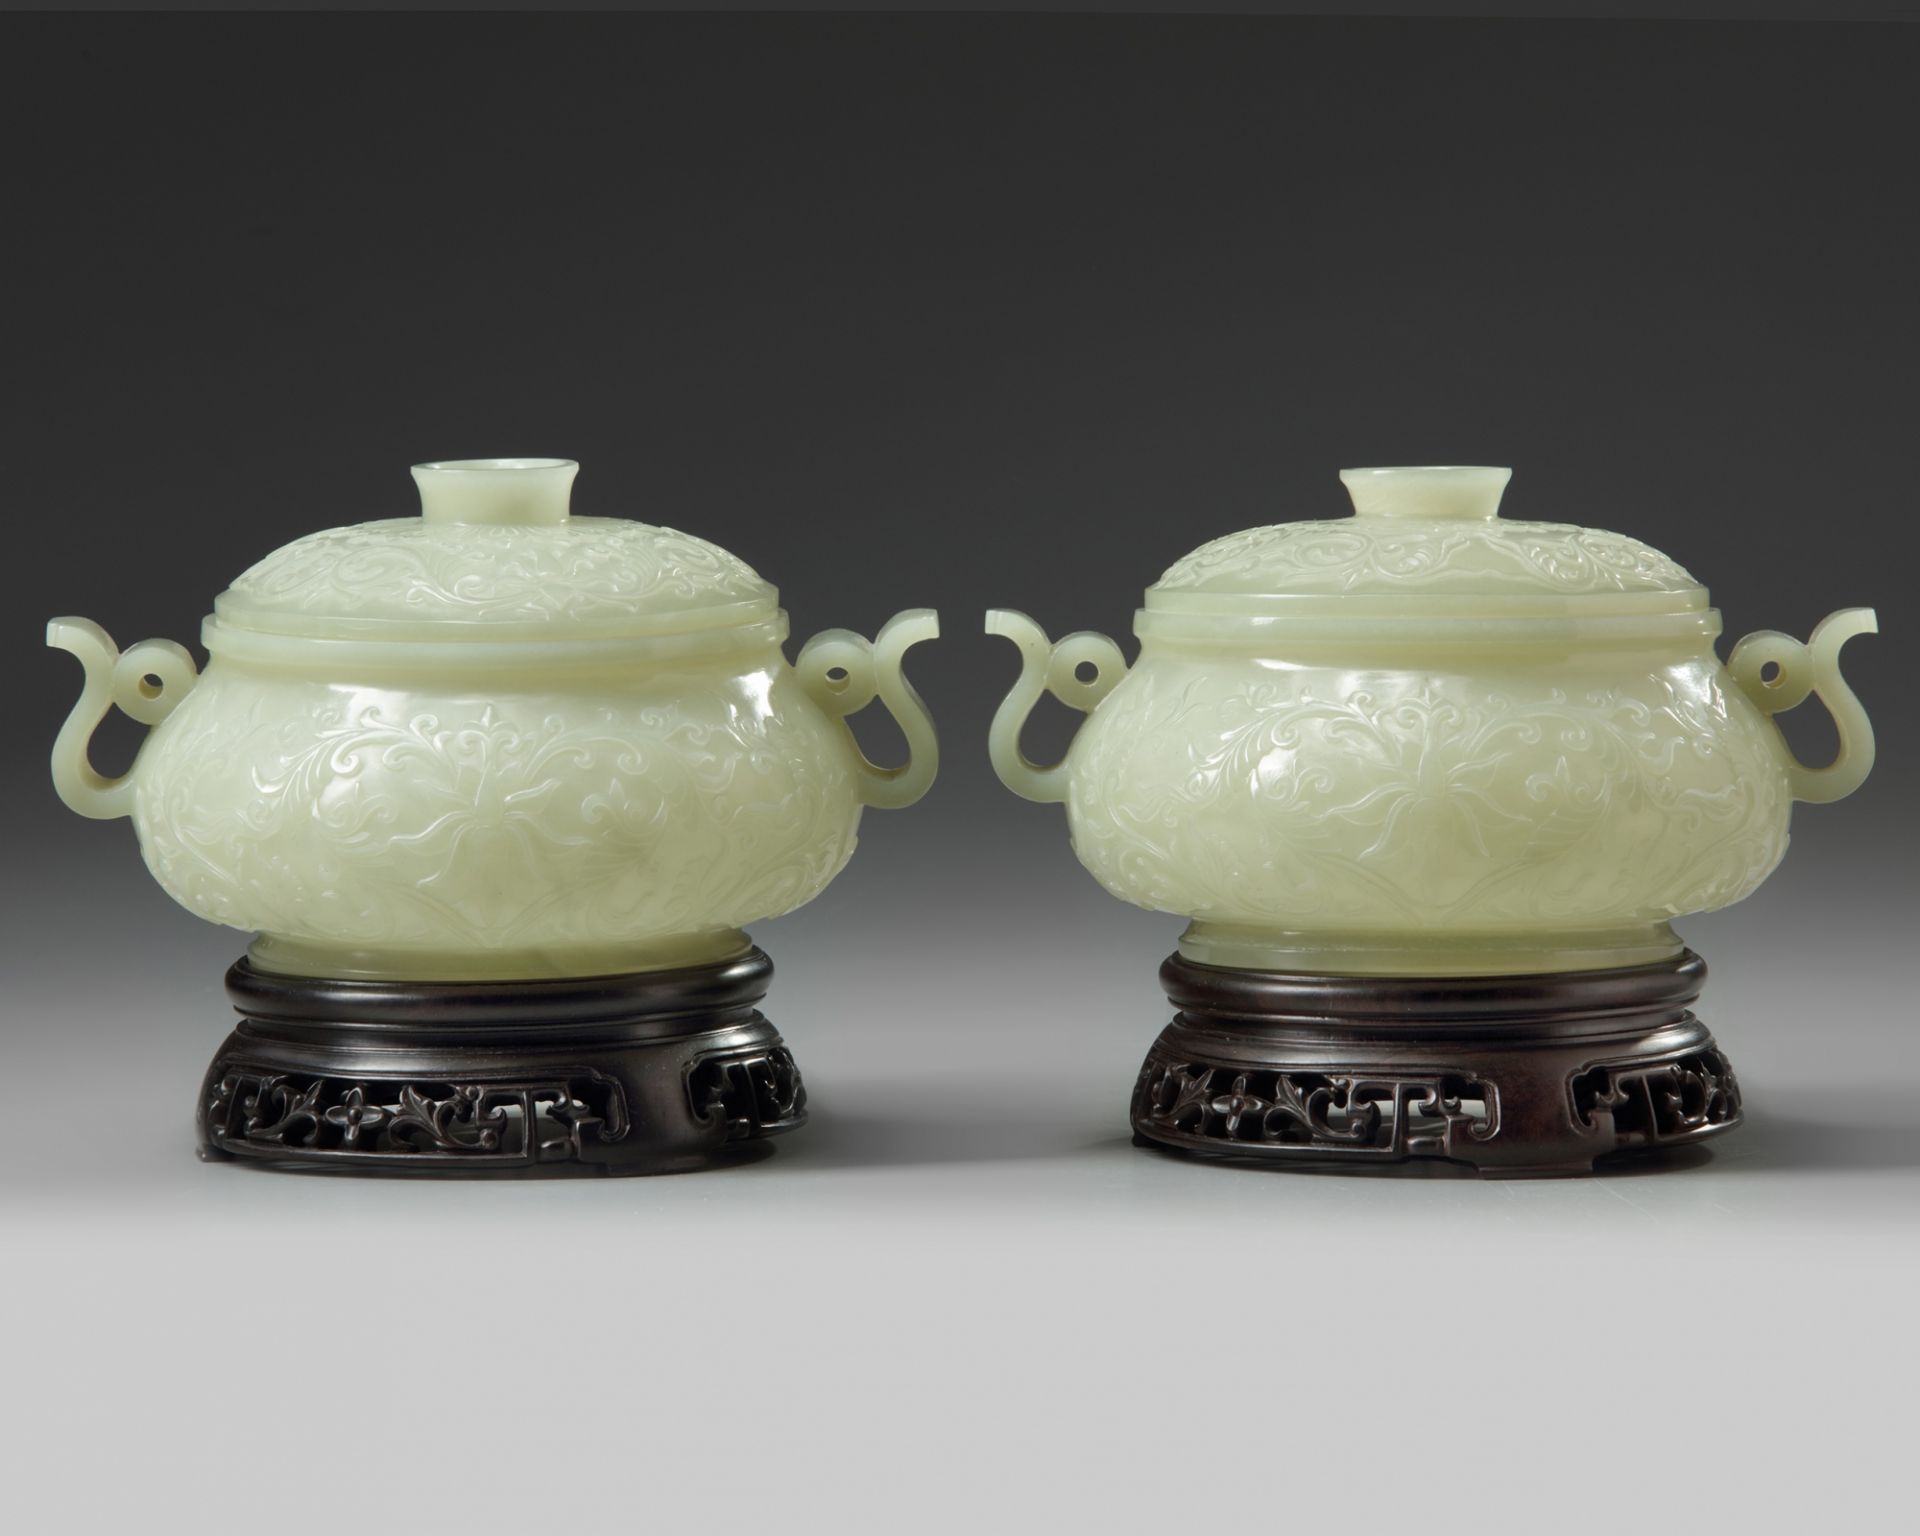 A pair of Chinese pale celadon jade censers and covers